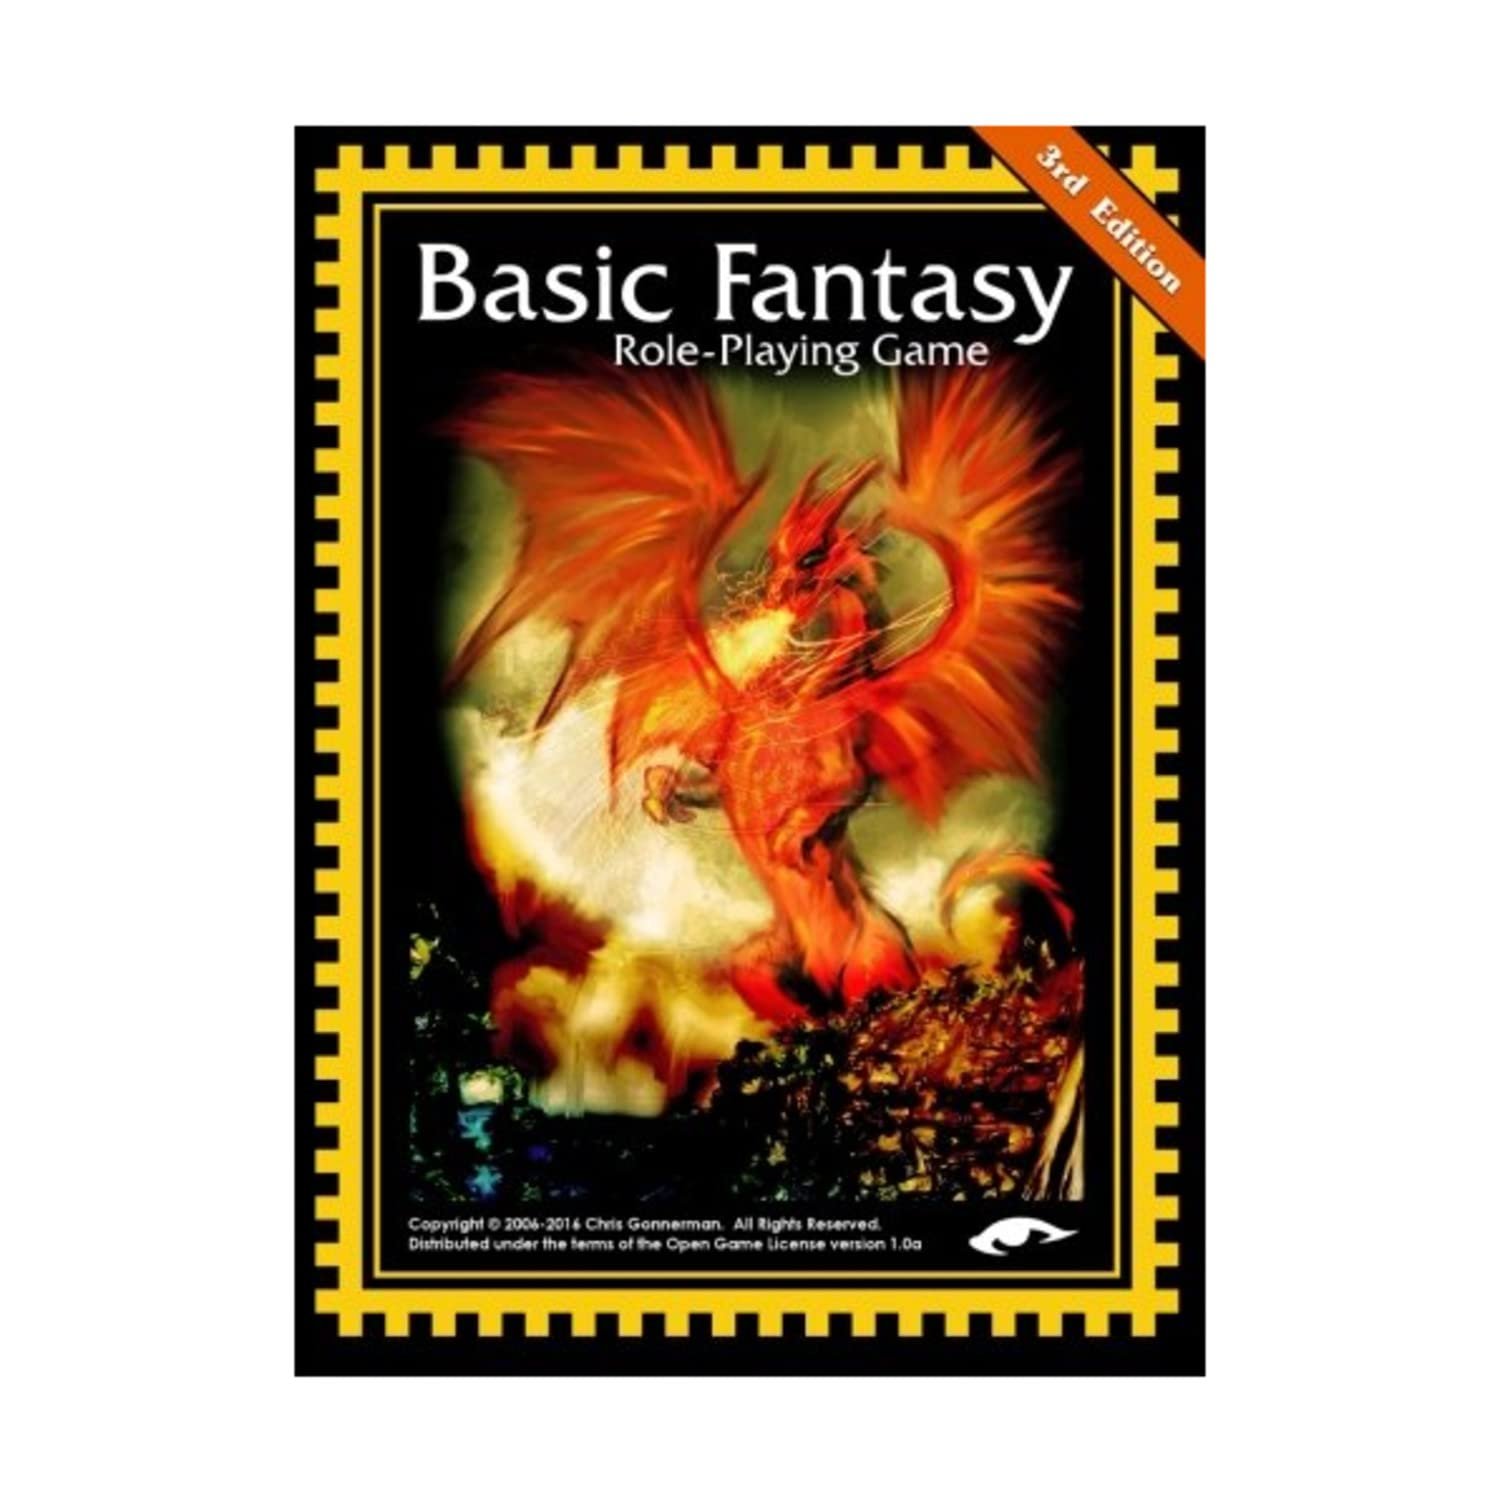 Basic Fantasy Role-Playing Game Review